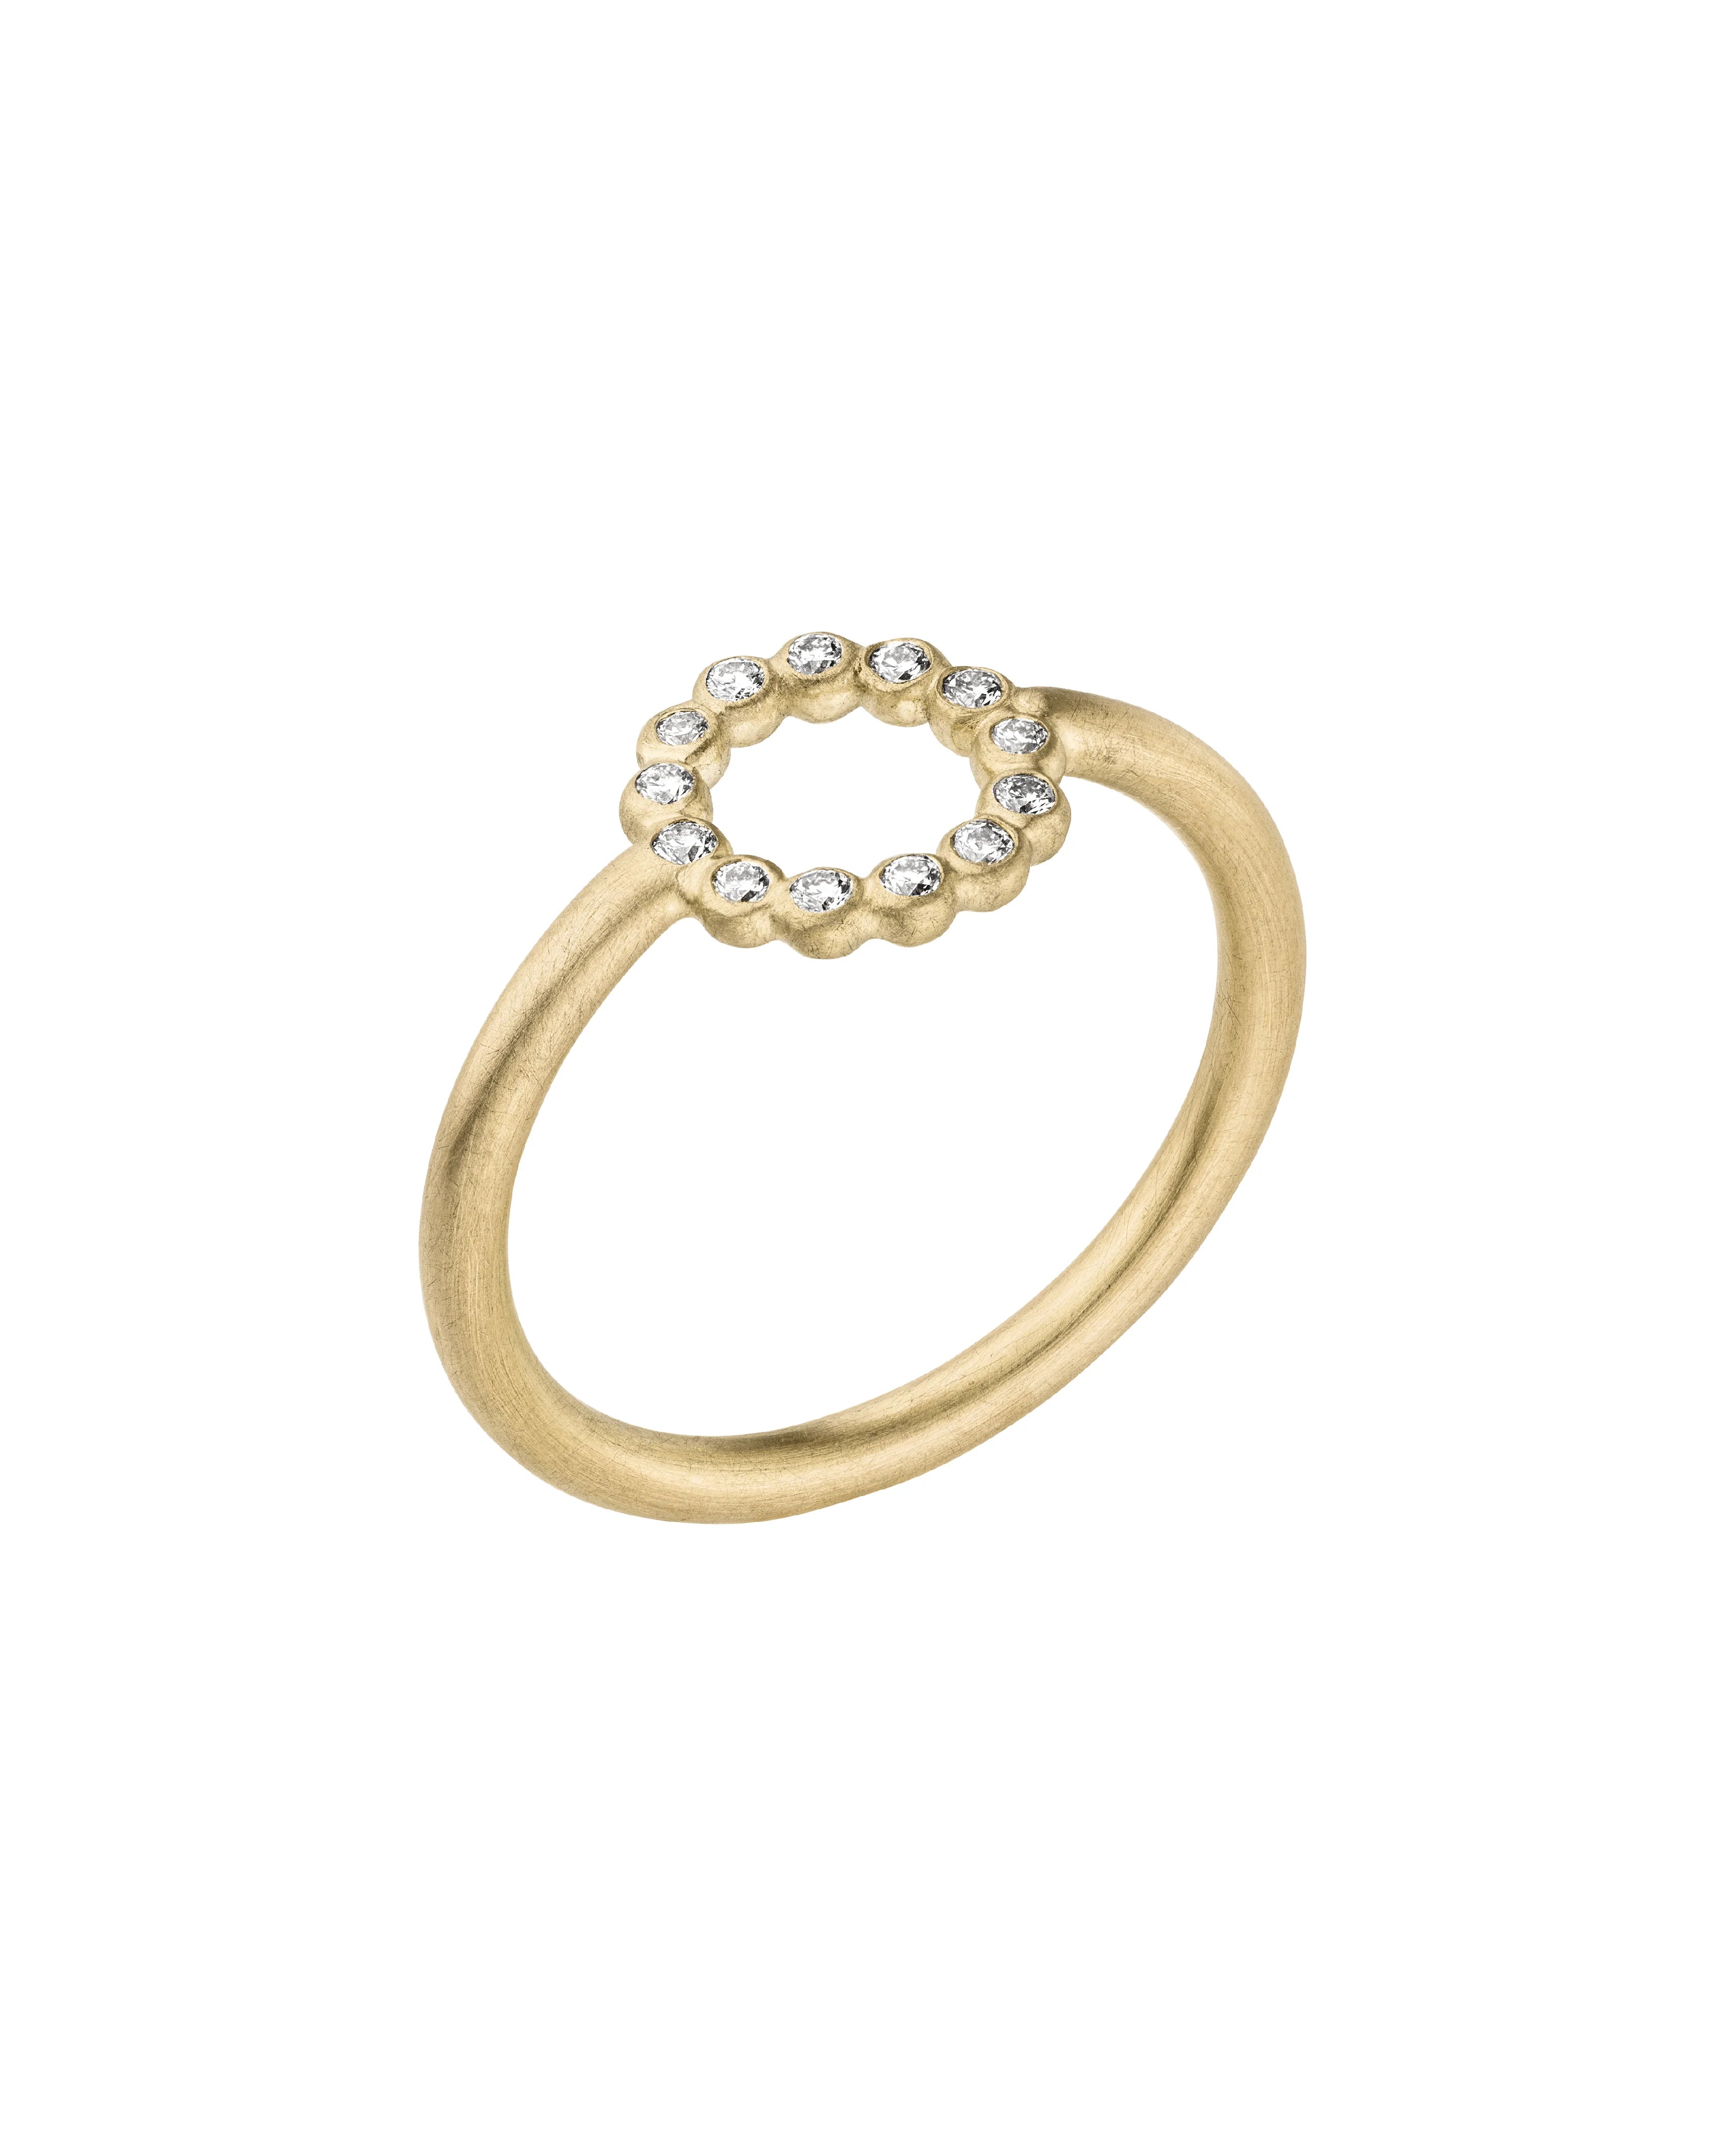 SOL - Gold Ring - Gelbgold 585